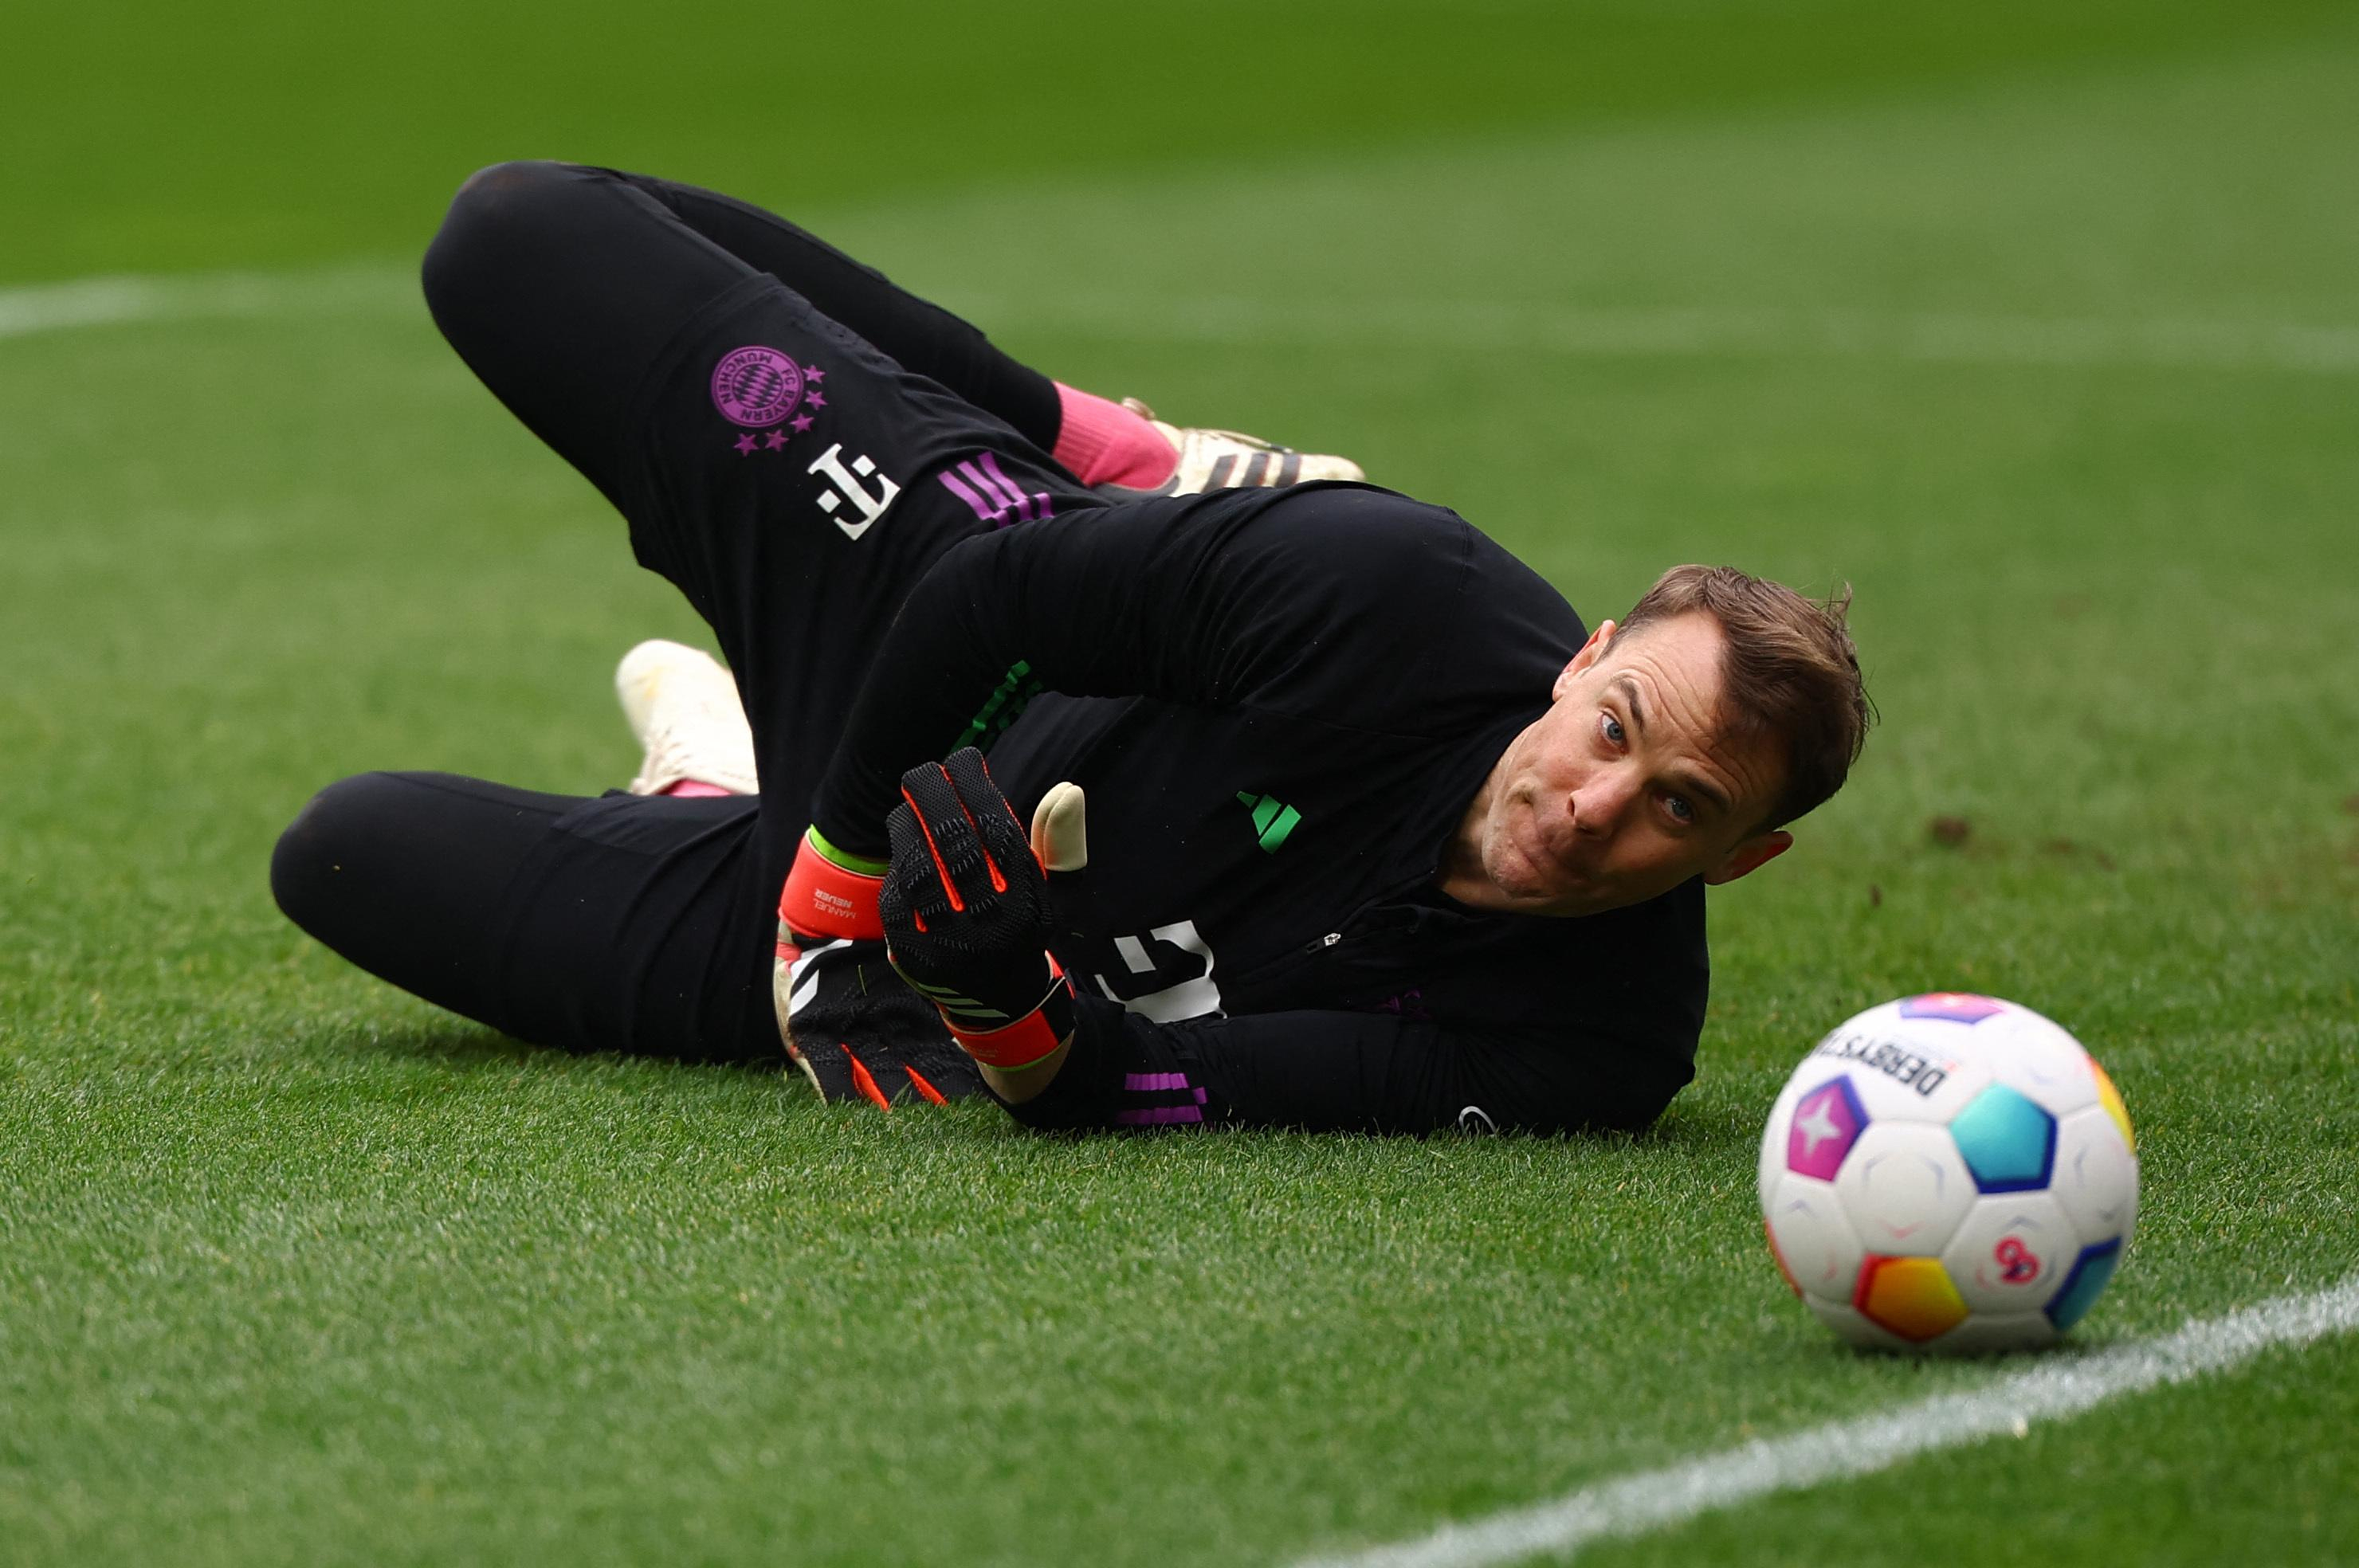 Football: Manuel Neuer, affected in the adductors, will be absent to face the Blues with Germany